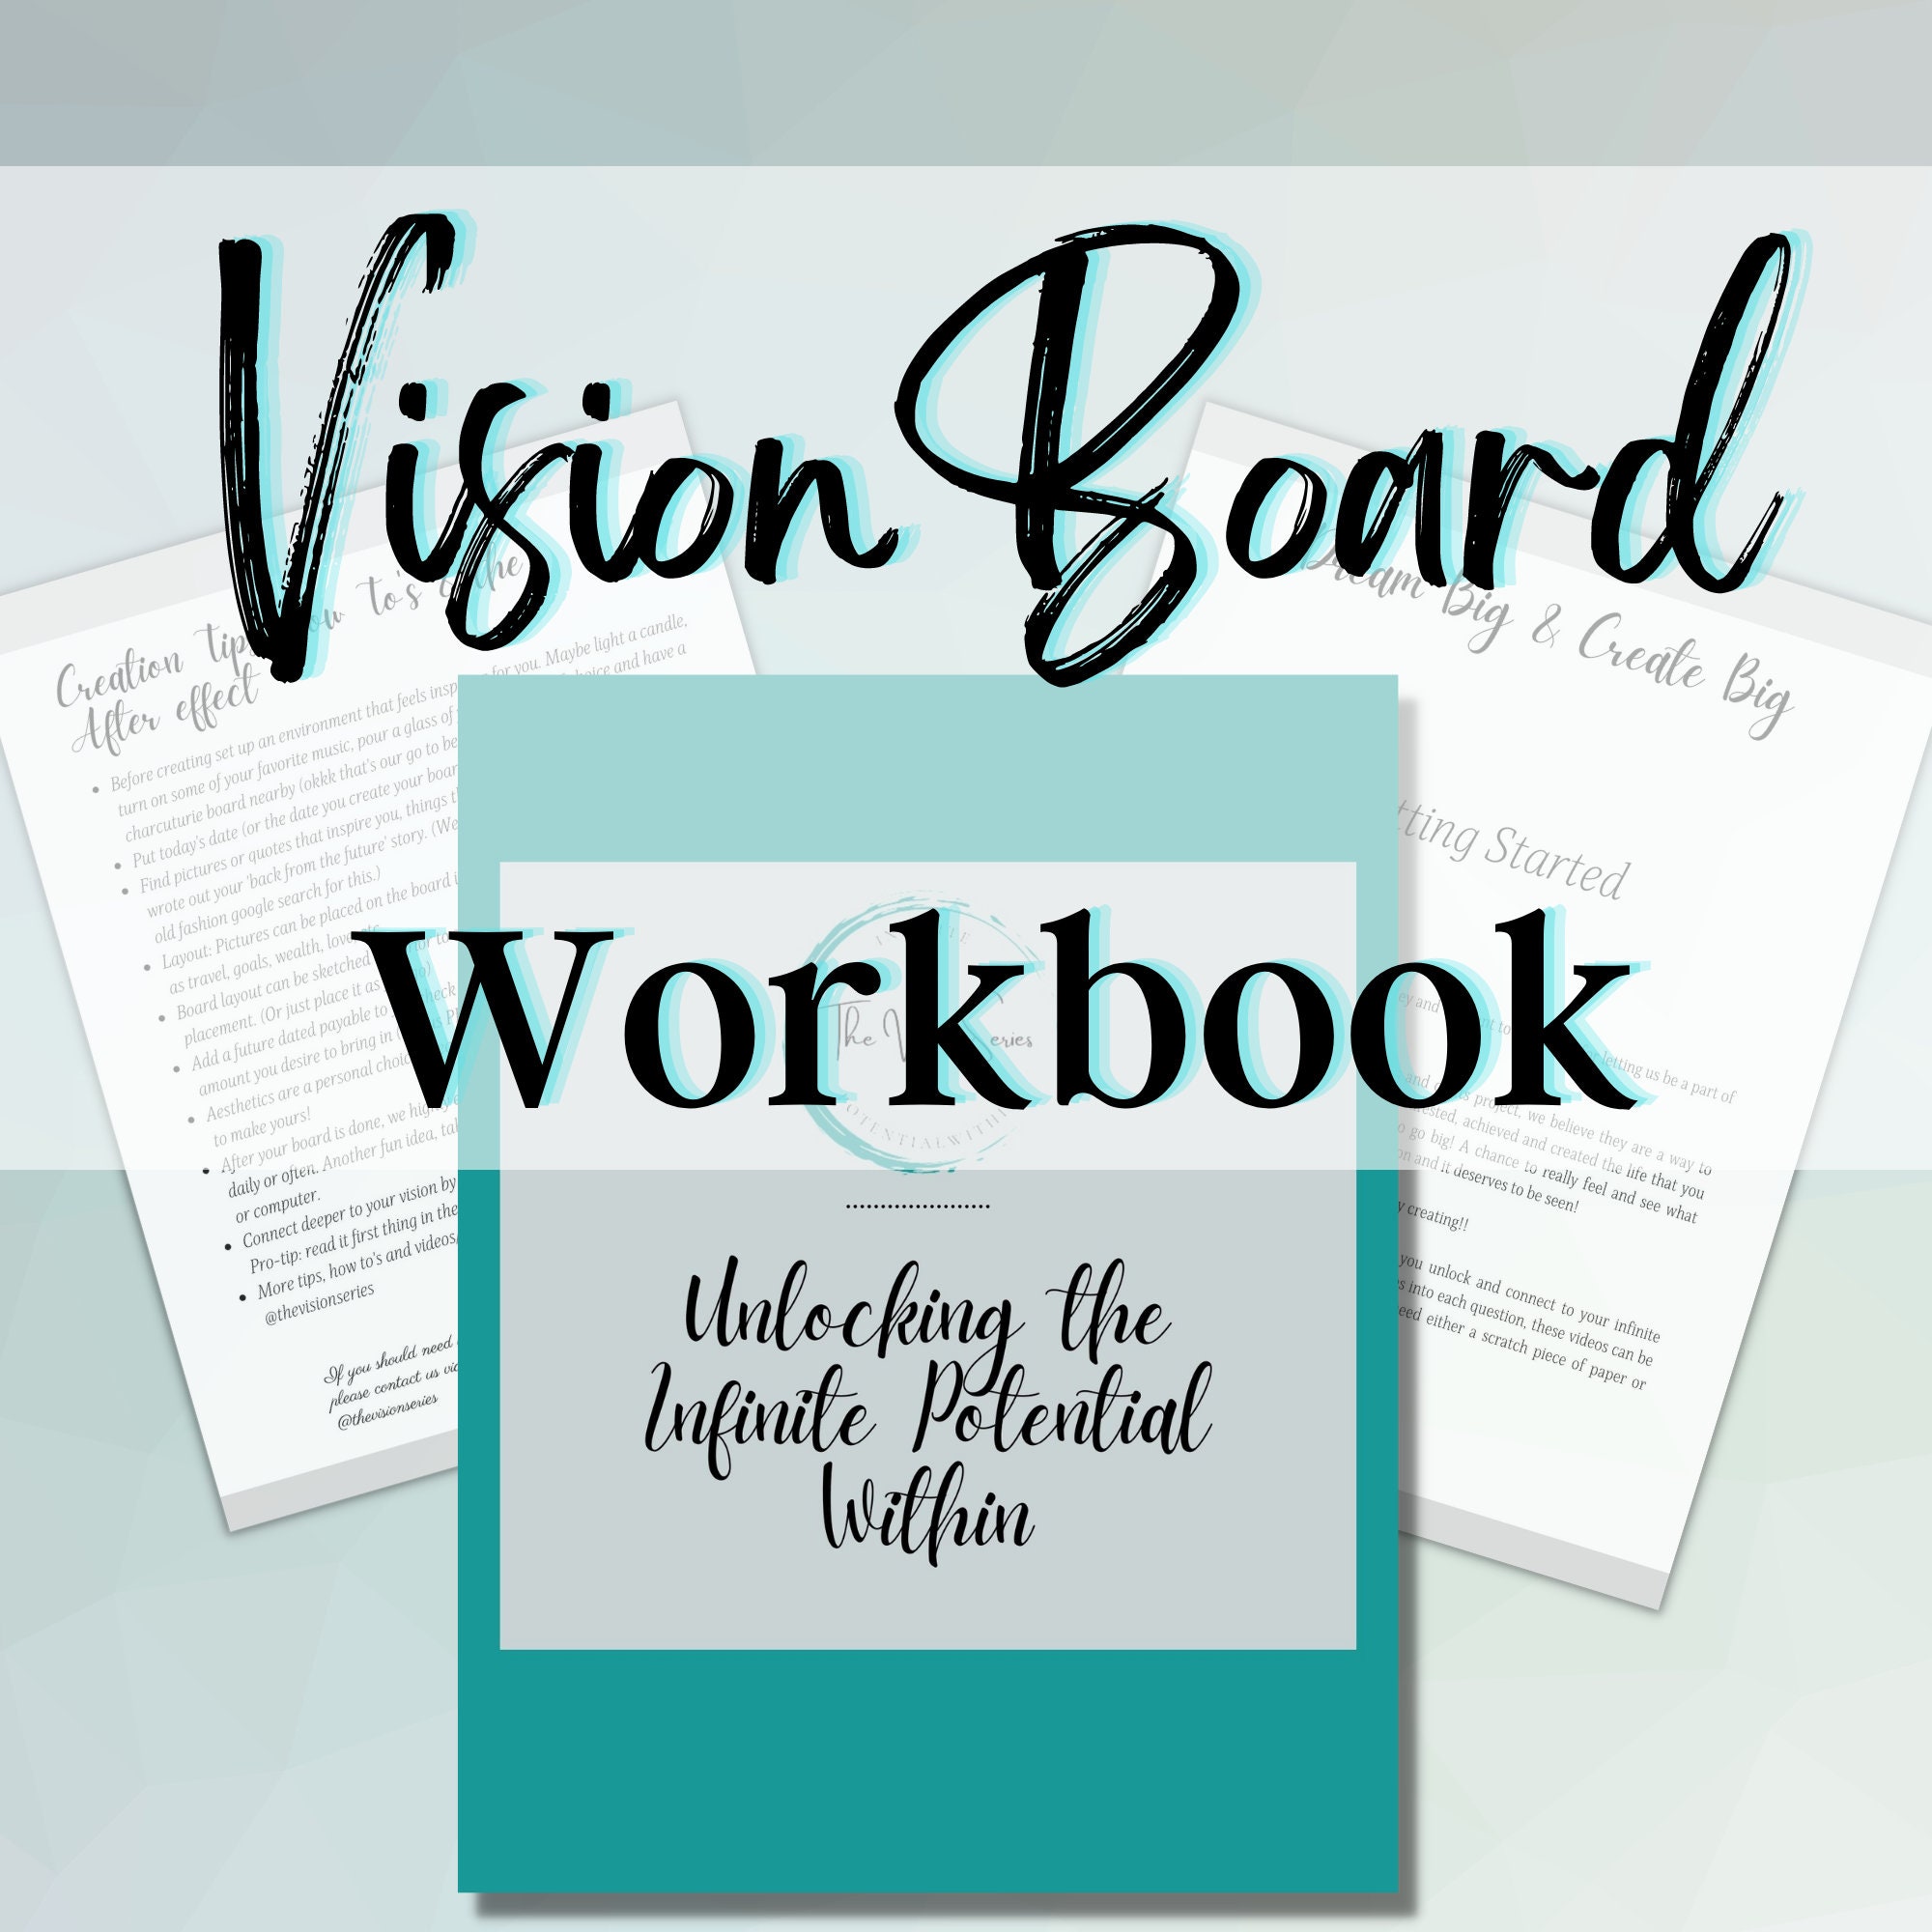 Vision Board Book: For Students Ideas Workshop Goal Setting